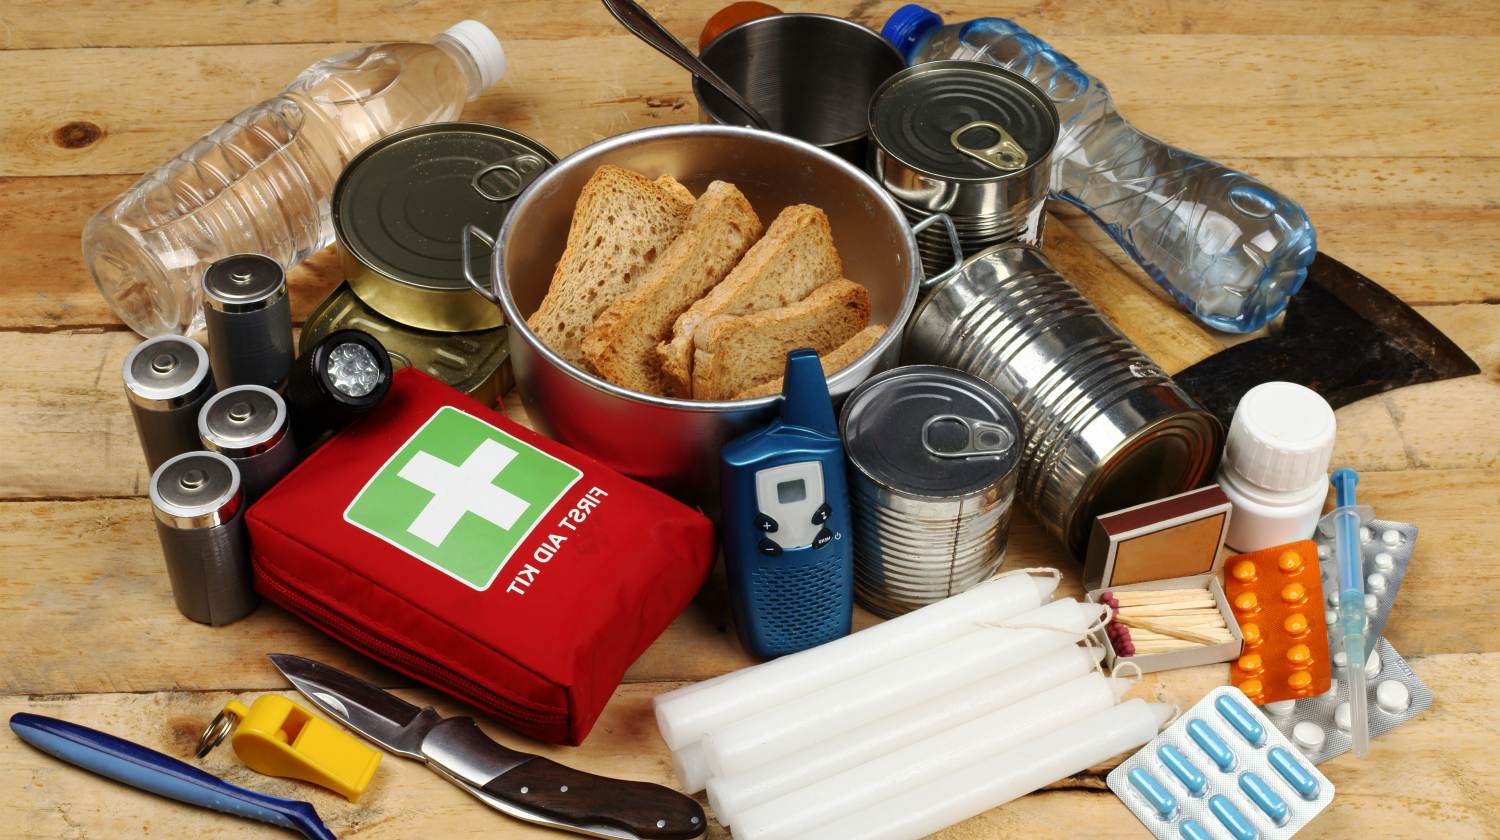 Feature | Items of emergency on wooden table | Everyday Uses For Your Emergency Survival Kit